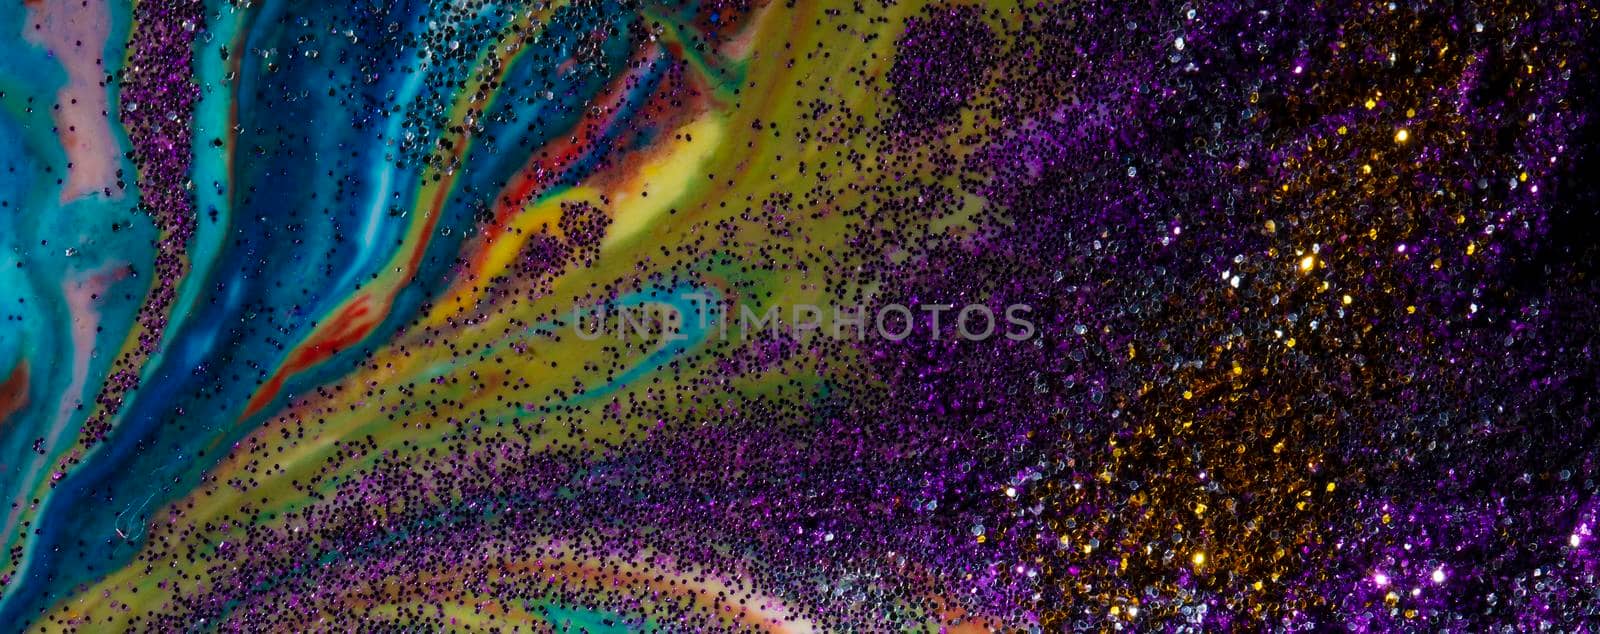 Baner: multicolored acrylic background with curls sprinkled with purple and gold sequins. Contemporary creativity. A colorful avant-garde painting with rich texture. A background made up of many shapes and materials. by Sviatlana